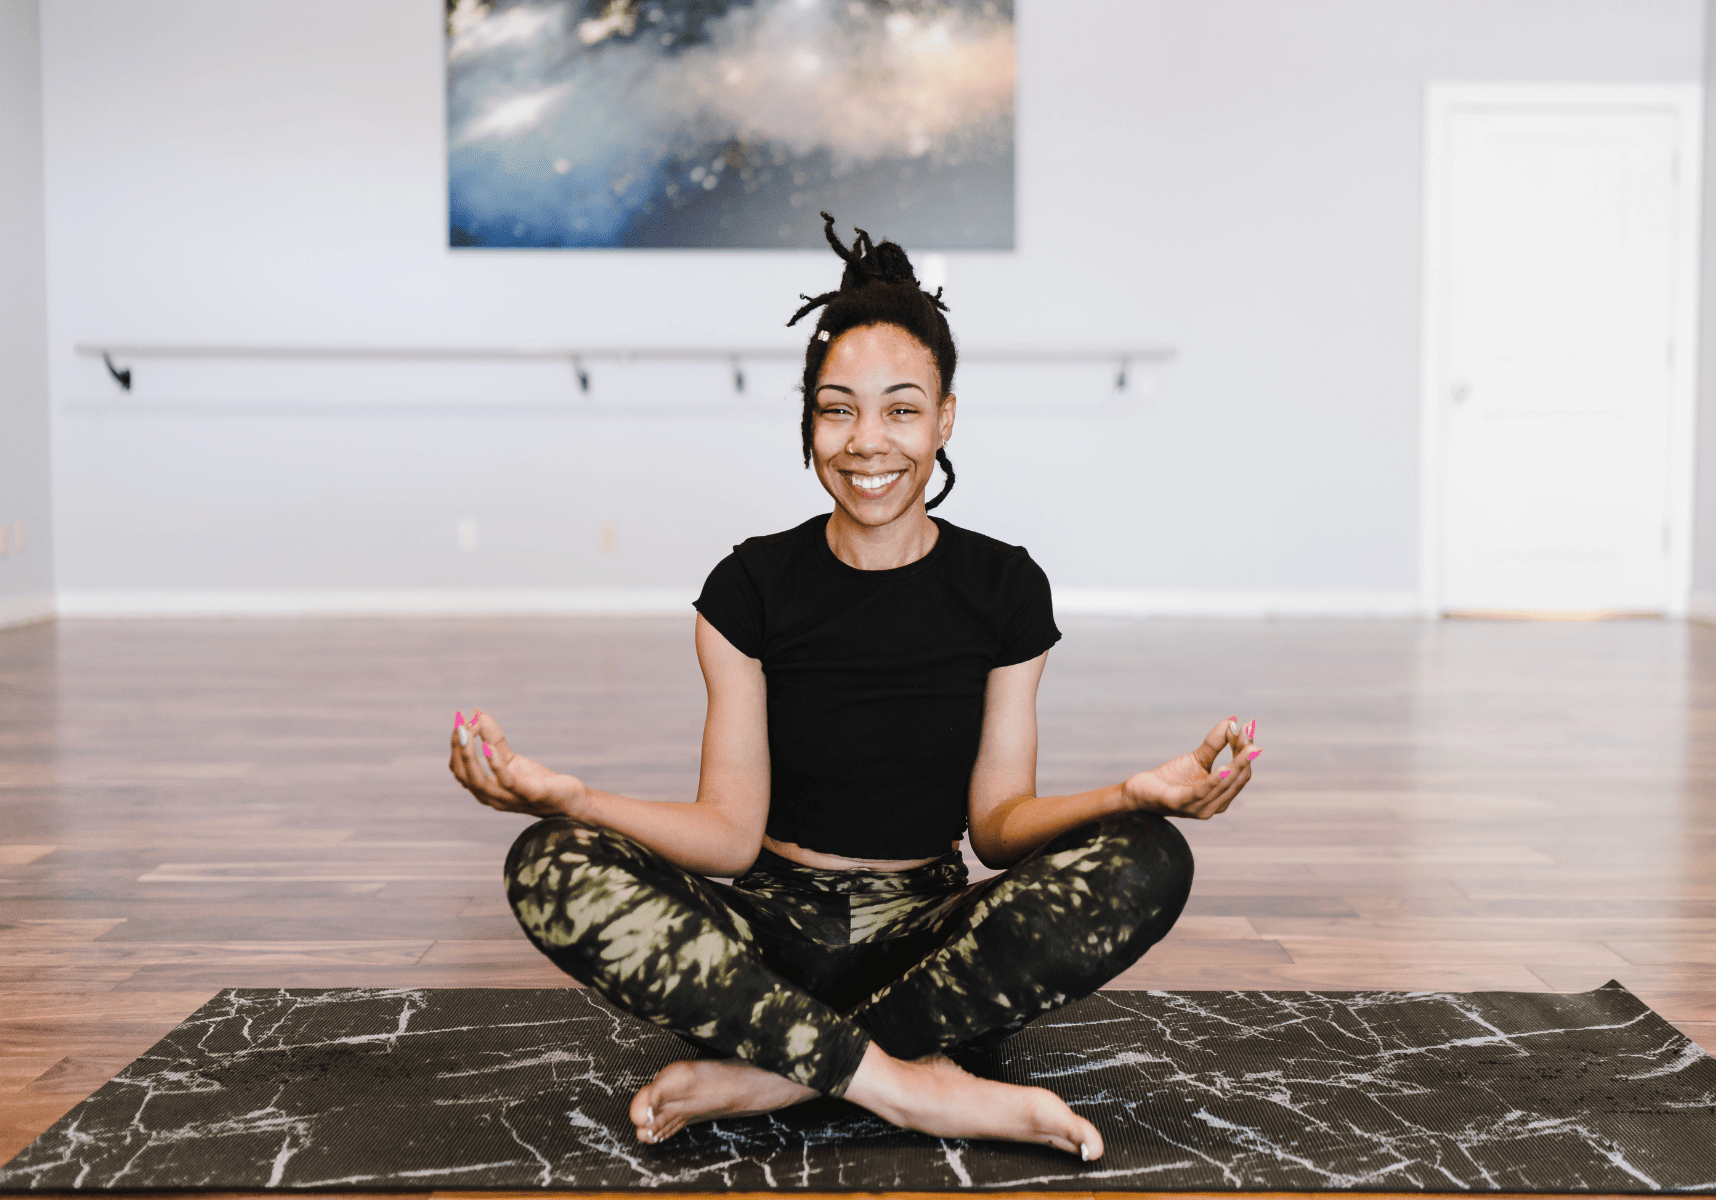 Humans of Bikram Yoga - Super Human: Chryssa From: I live and work in  Kitchener, Ontario. Started practicing Bikram Yoga: I started Bikram Yoga  in Toronto in 2007 when I moved from